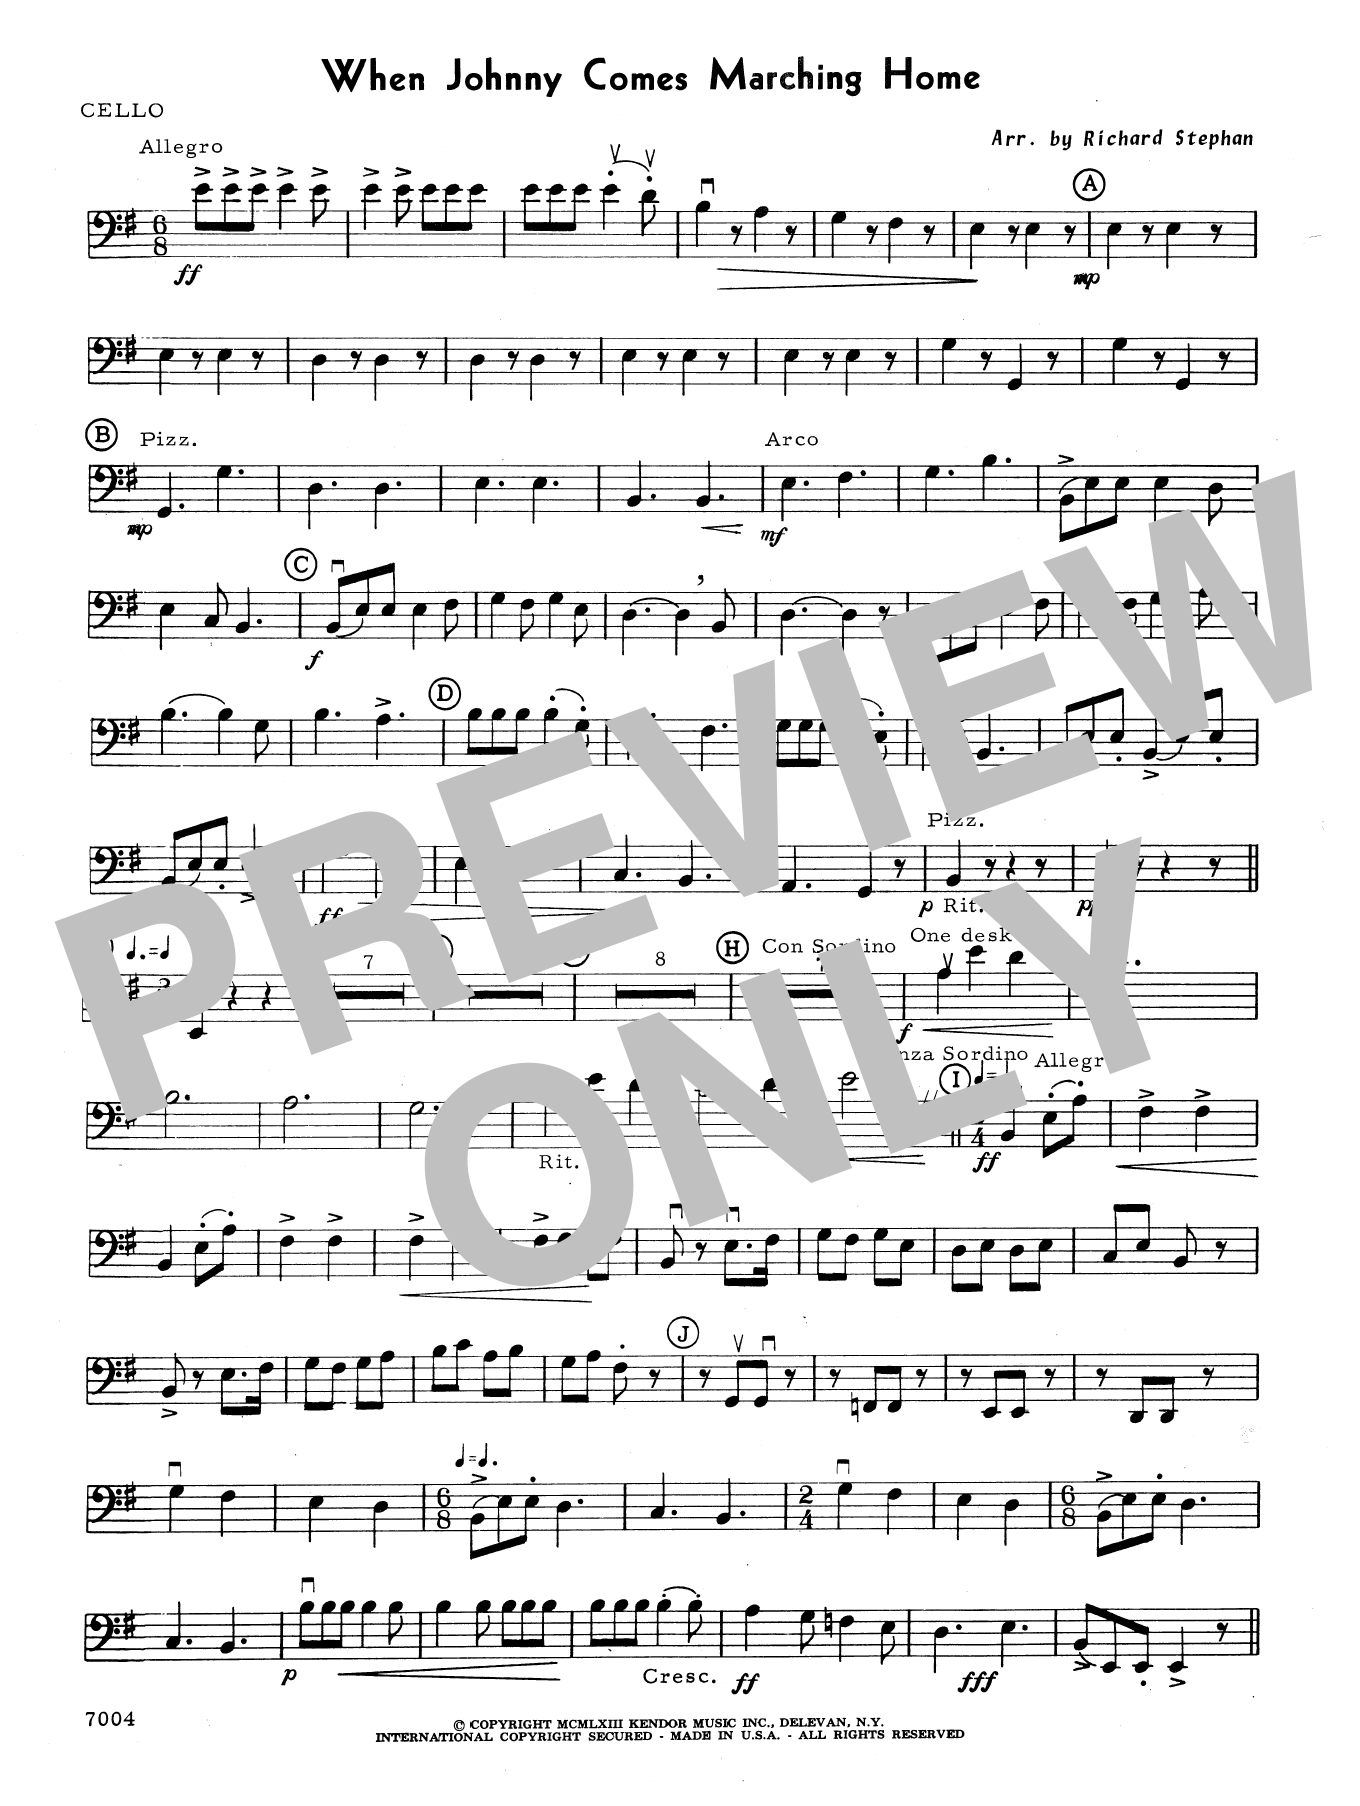 Download Richard Stephan When Johnny Comes Marching Home - Cello Sheet Music